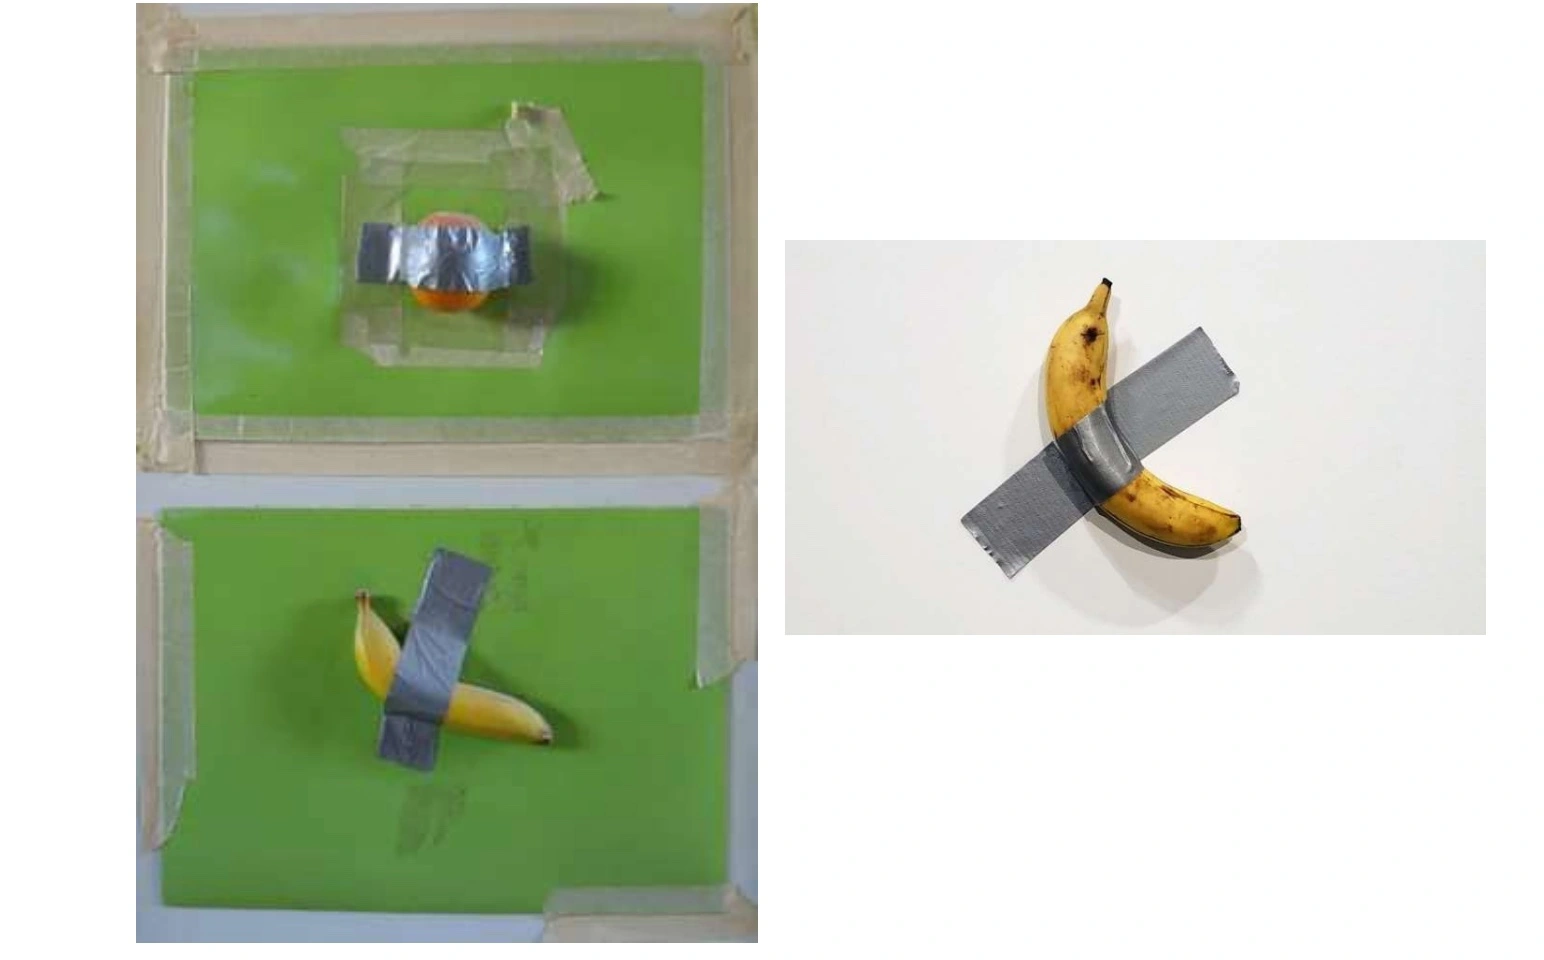 Maurizio Cattelan Responds to Copyright Infringement Lawsuit, Saying He Created Viral Banana Sculpture ‘Without Knowledge’ of Other Artist’sWork